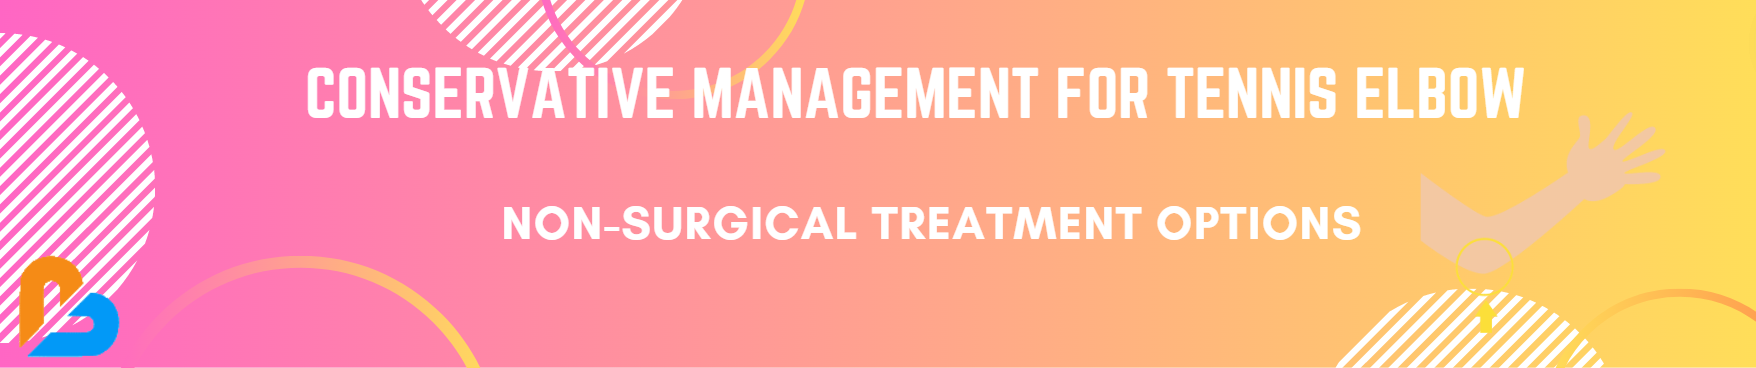 Conservative Management for Tennis Elbow: Non-Surgical Treatment Options